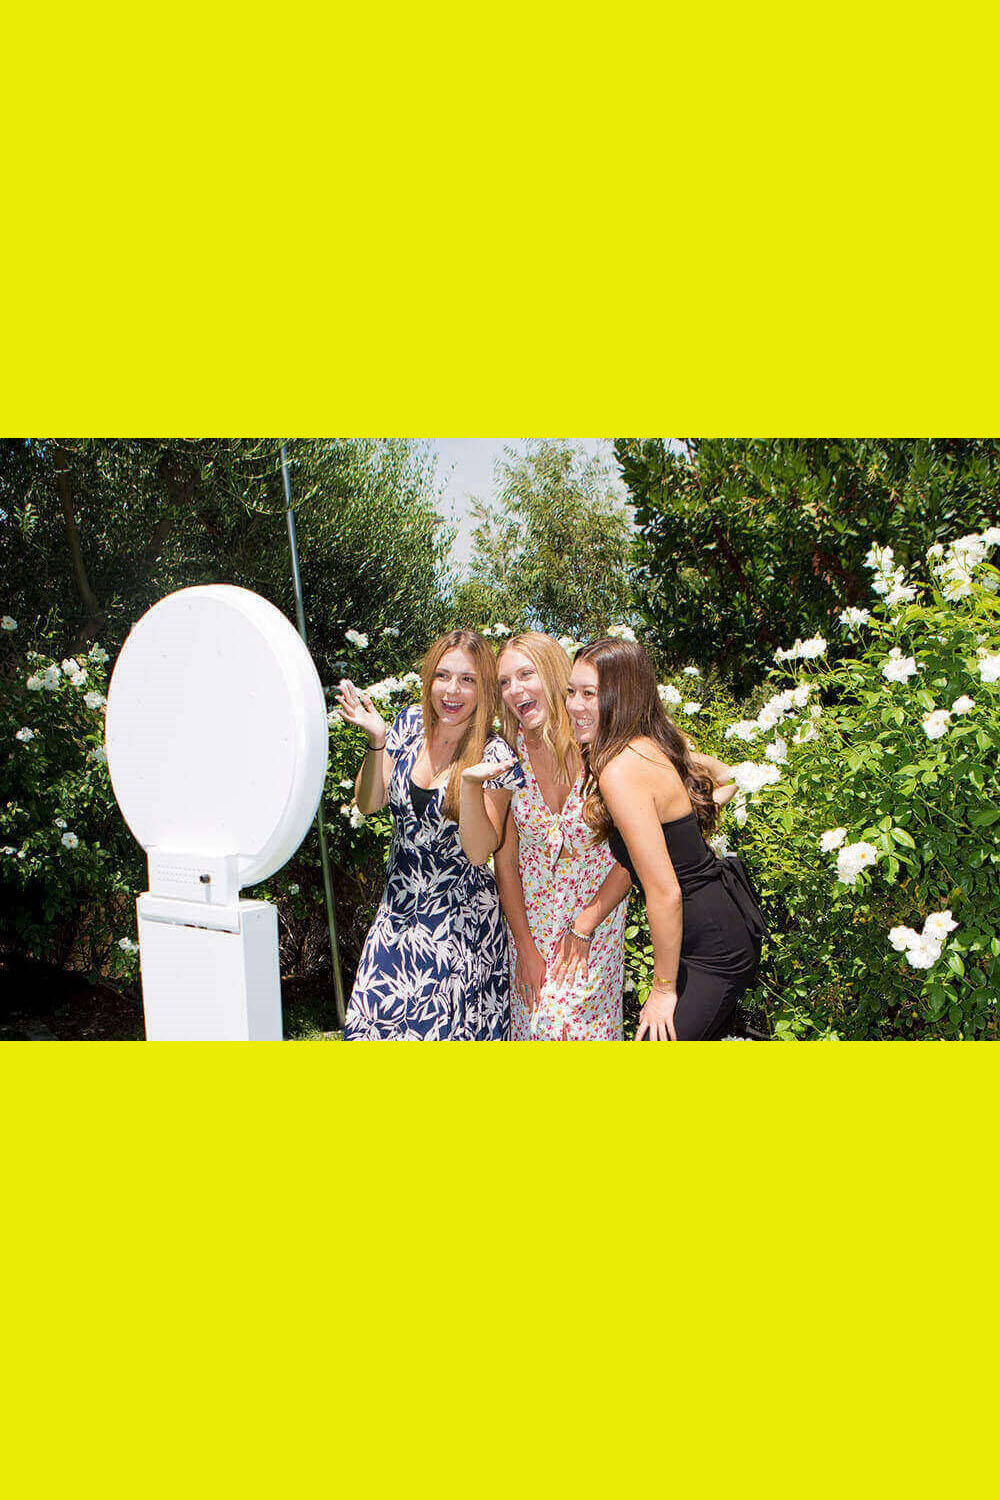 Three girls know how to have fun with this Bakersfield selfie station.